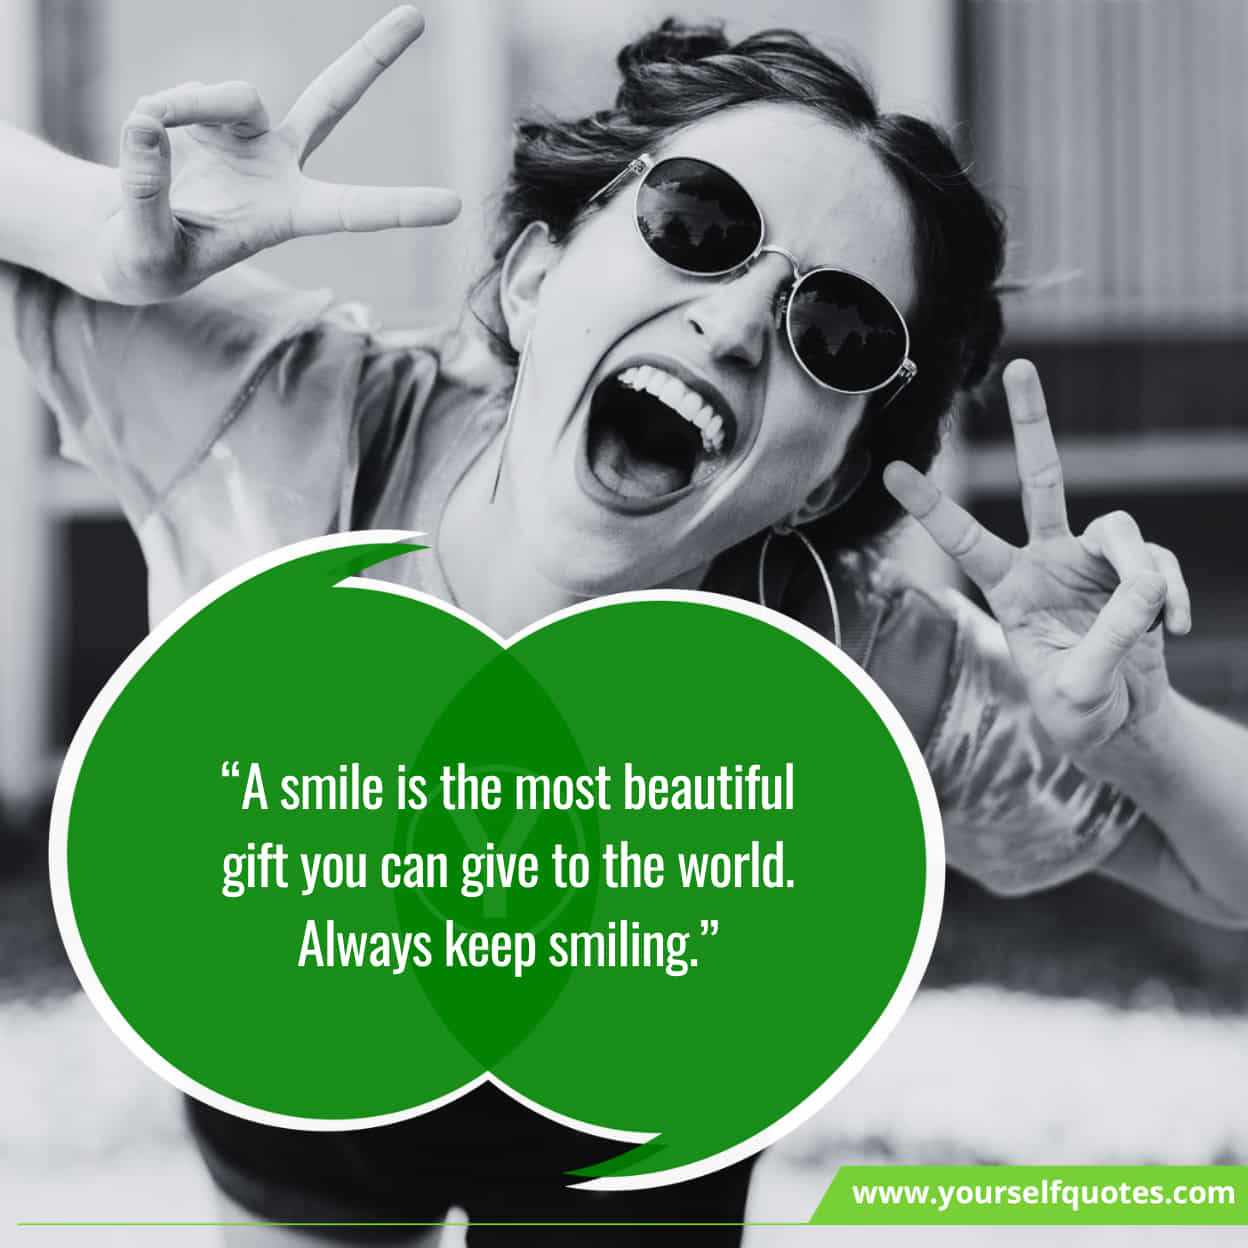 Best Inspiring Quotes About Smile